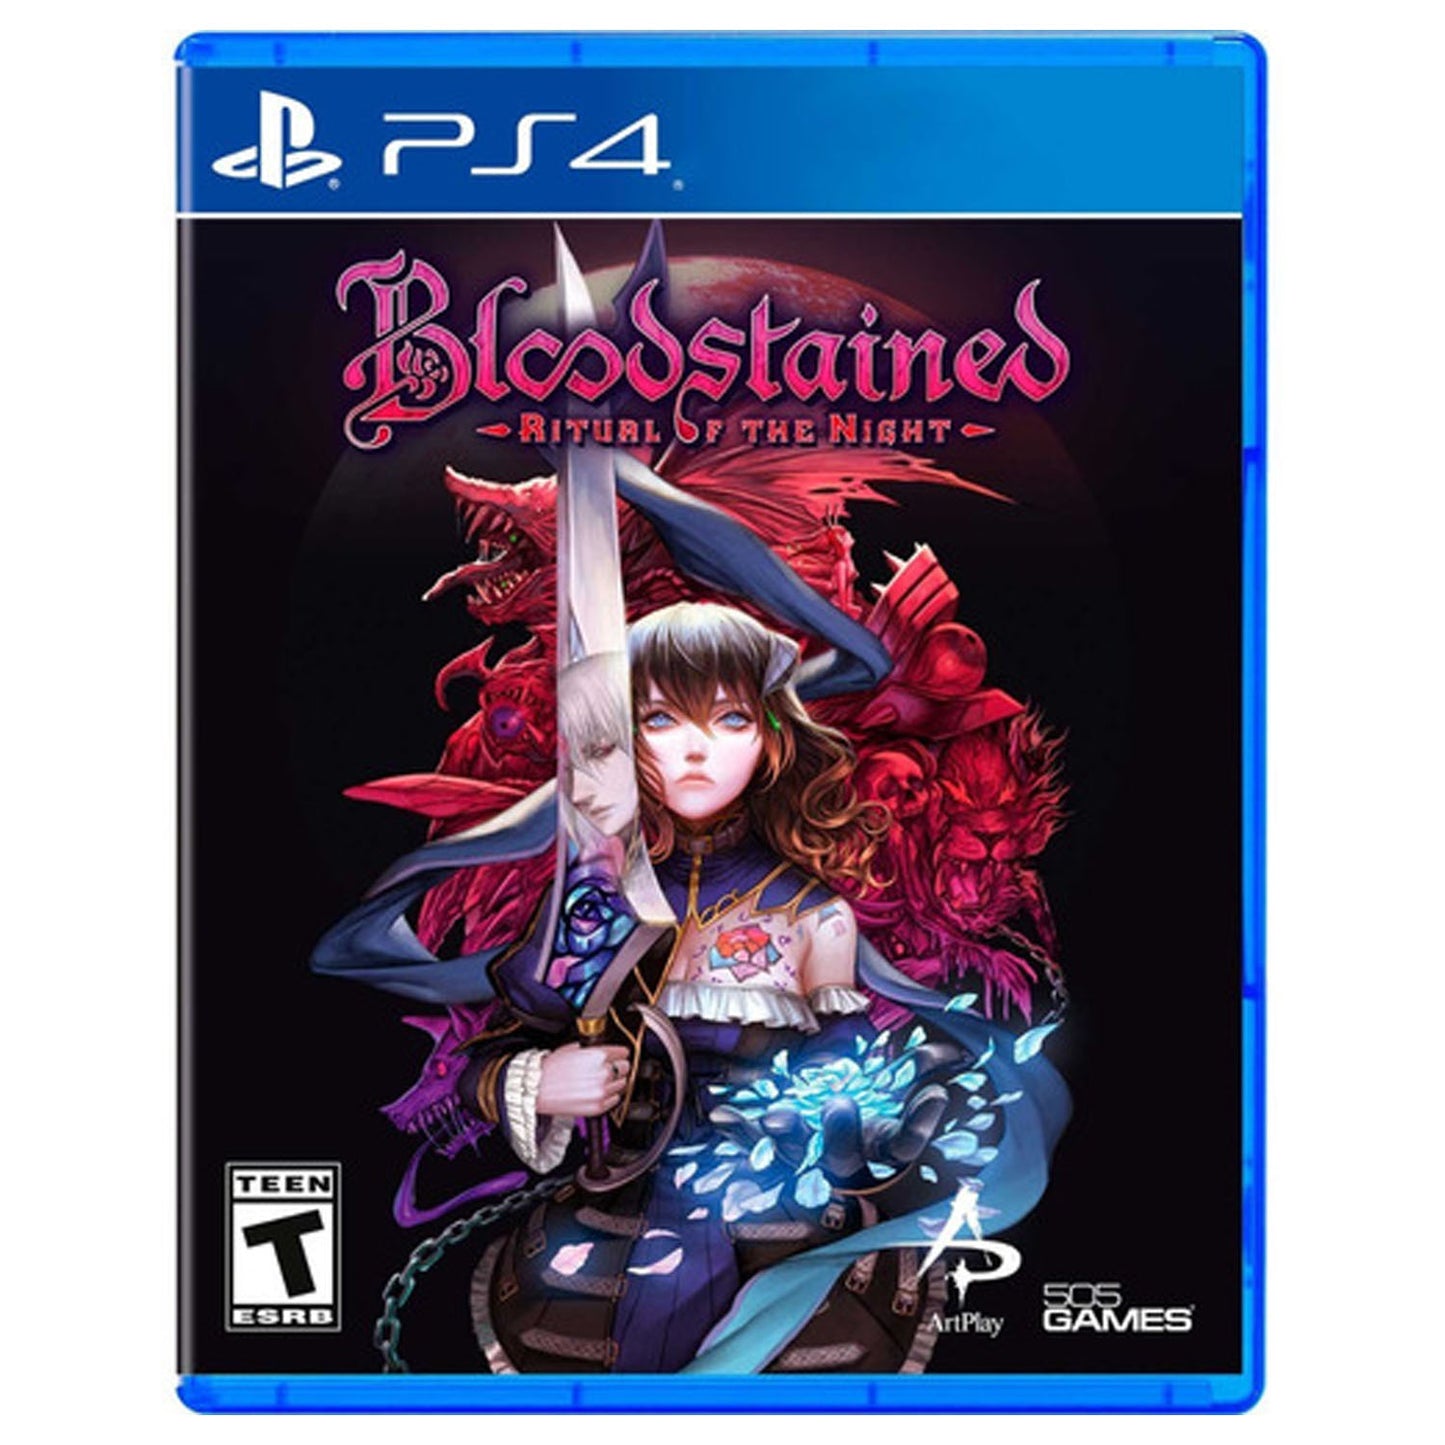 Bloodstained ritual of the night PS4